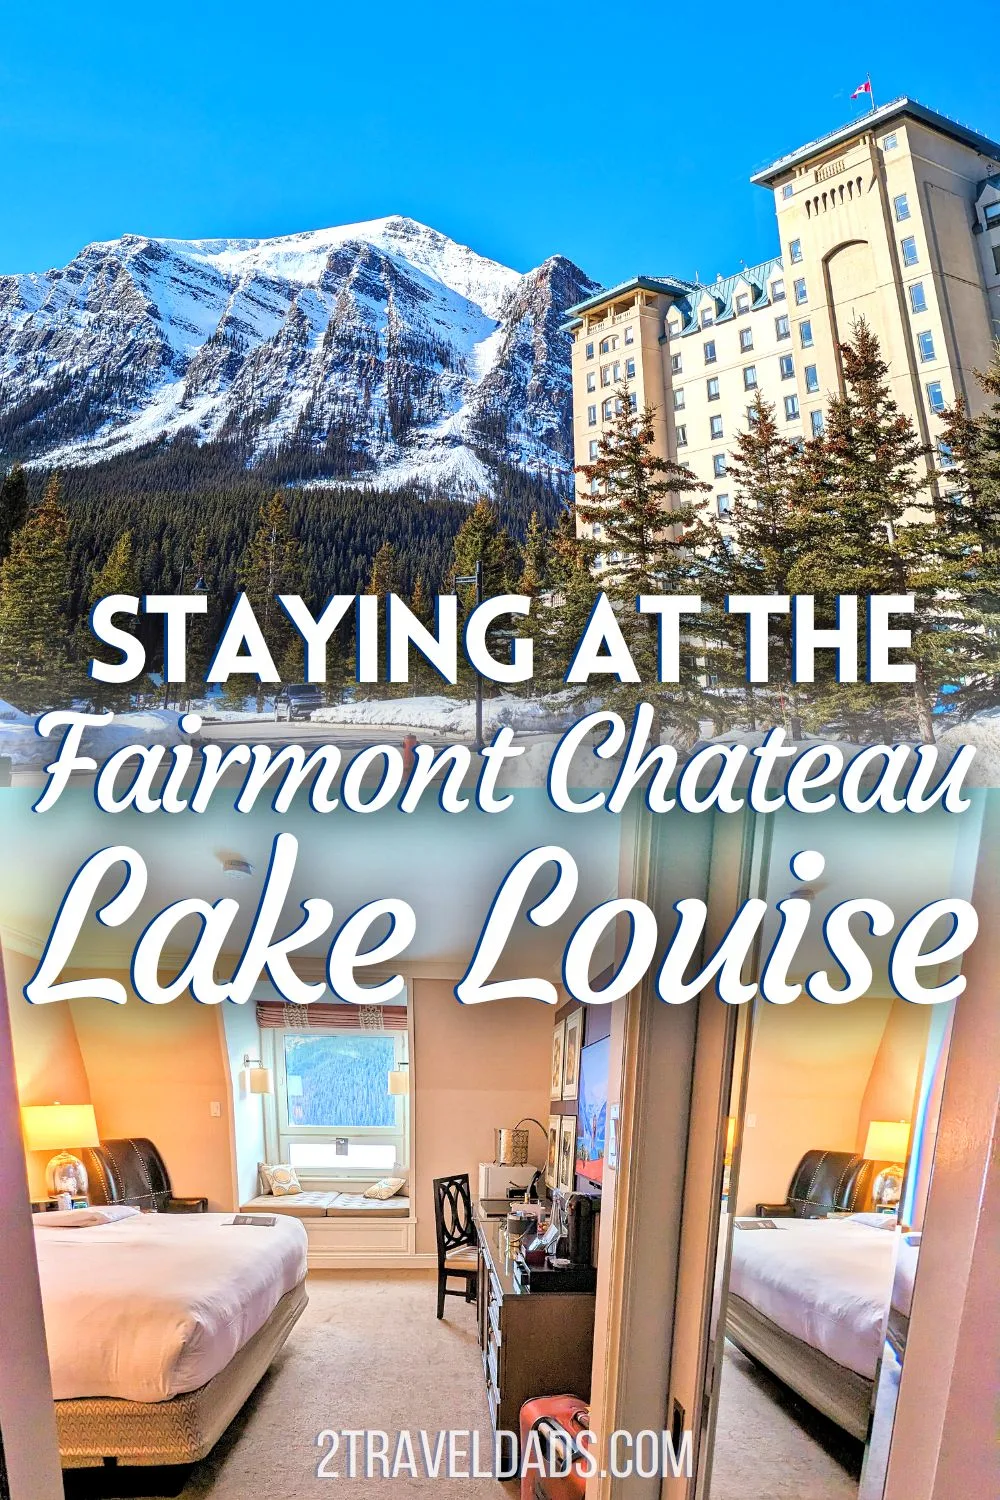 Staying at the Fairmont Chateau Lake Louise is a bucket list travel experience for many. See all the details about rooms, restaurants, amenities and things to do at the Chateau Lake Louise. This is a complete review of staying at the Chateau, including Fairmont Gold information.